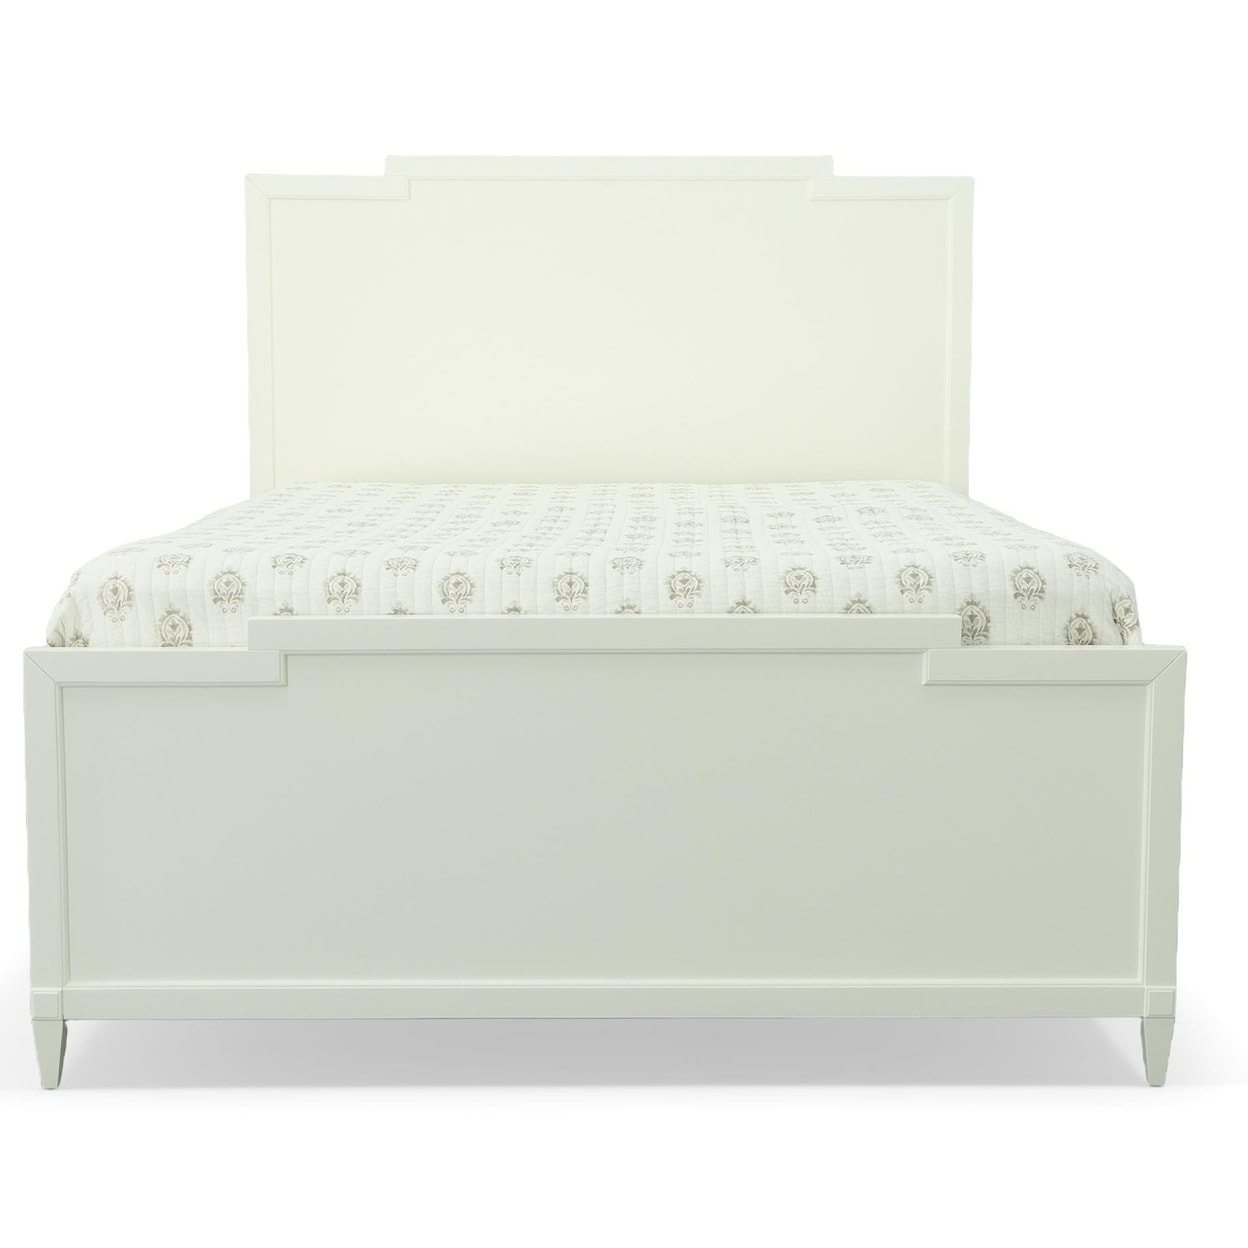 My Home Furnishings Whitehaven Queen Bed